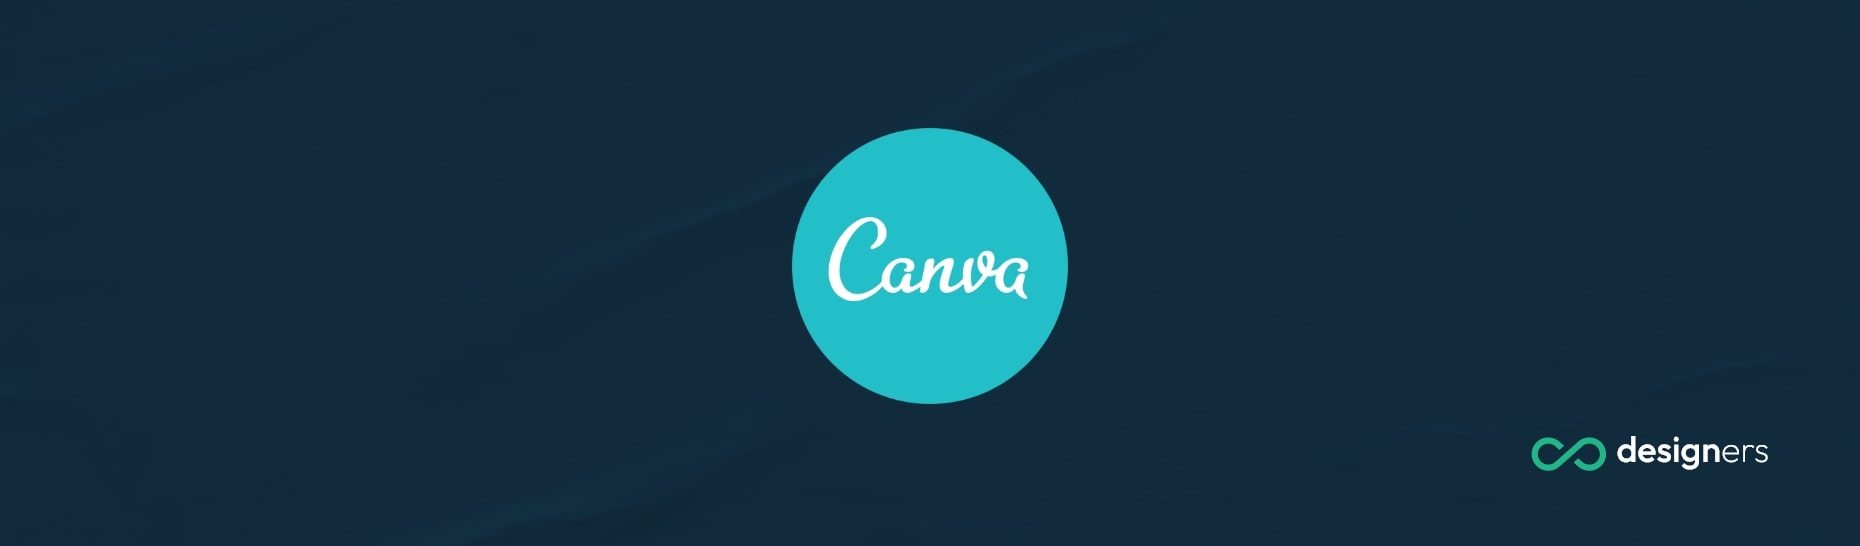 Can I Buy Shares in Canva?